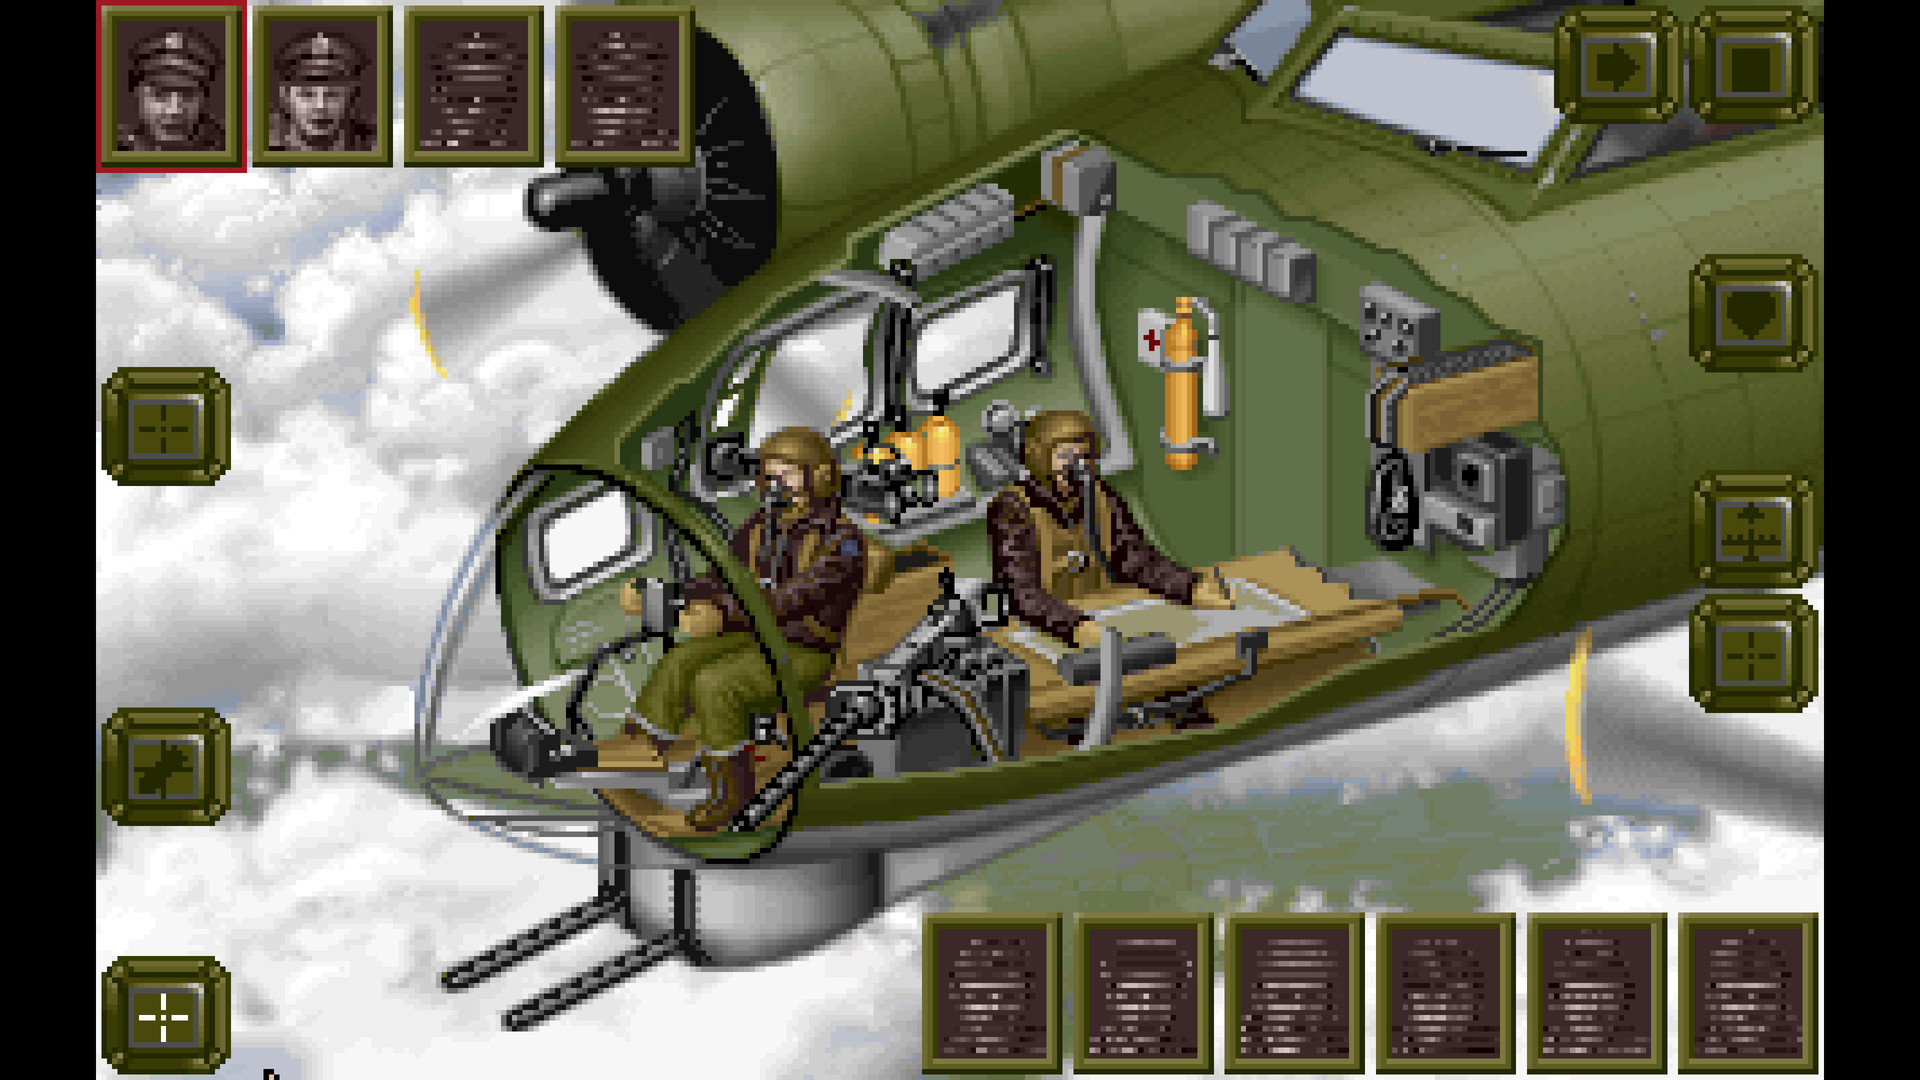 B-17 Flying Fortress: World War II Bombers In Action Steam CD Key